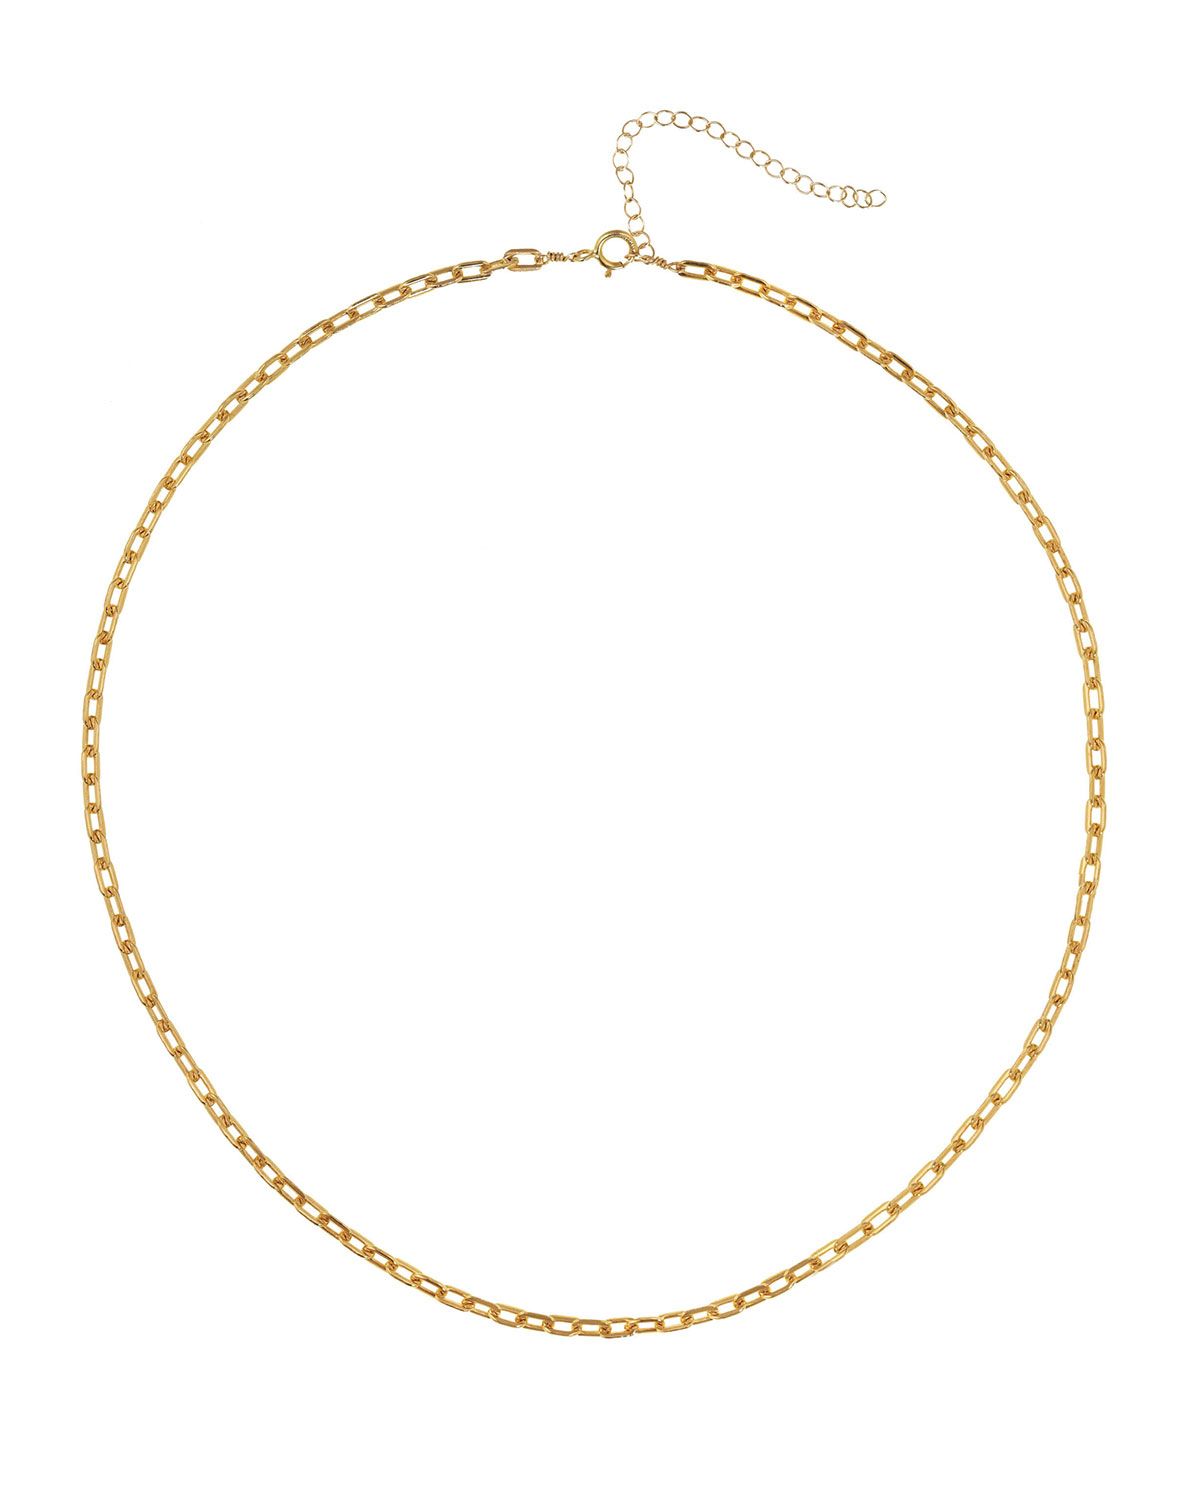 Garla 14k Gold-Filled Chain Necklace | Neiman Marcus